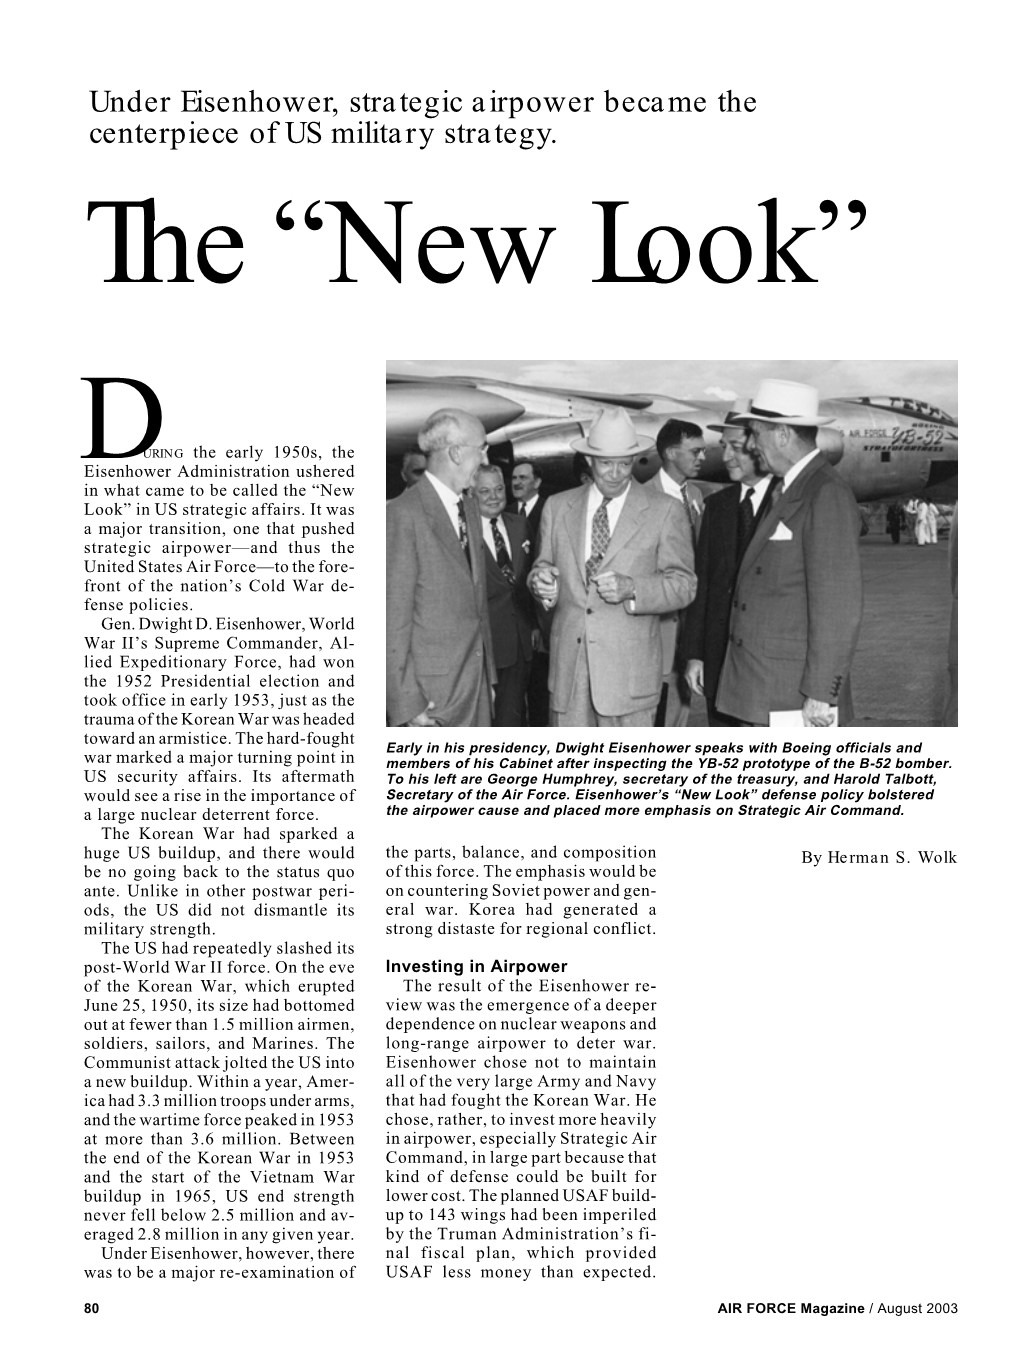 Under Eisenhower, Strategic Airpower Became the Centerpiece of US Military Strategy. the “New Look”